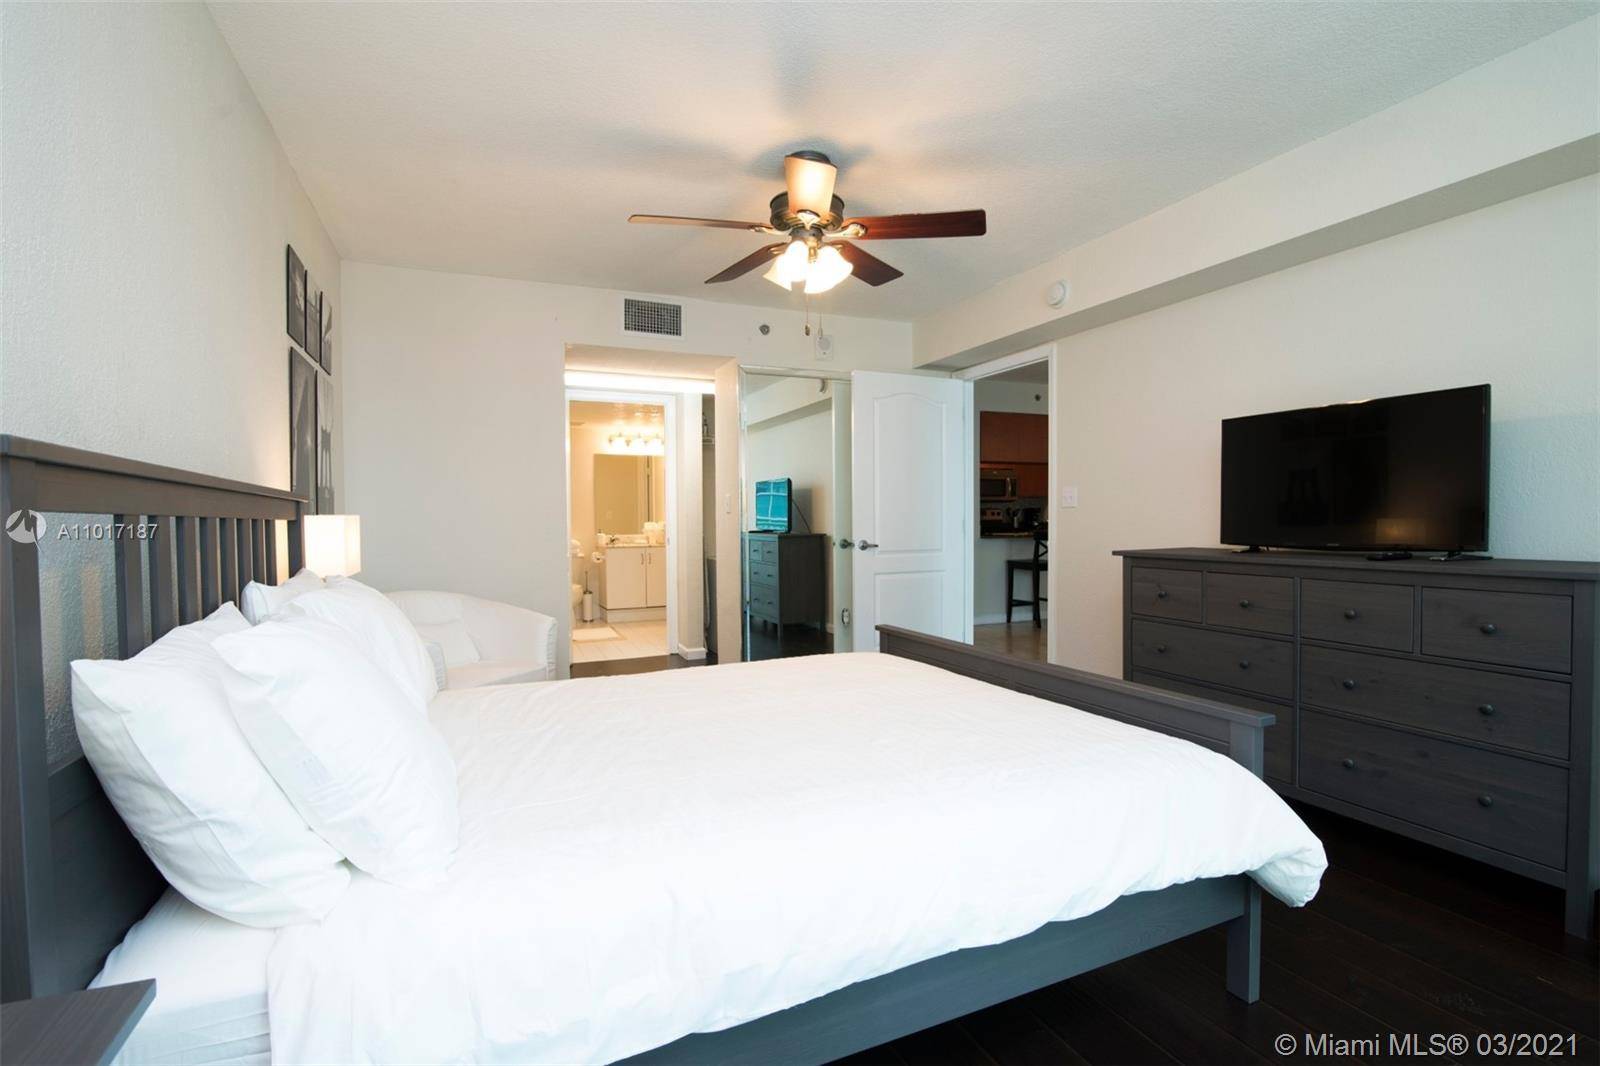 AVAILABLE FROM SEPTEMBER 1, 2022 Fully furnished 1 bedroom 1 bathroom Apartment, laminated floors completed equipped kitchen, washer and dryer in unit, Bay view, Includes Cable TV, Wi Fi High ...